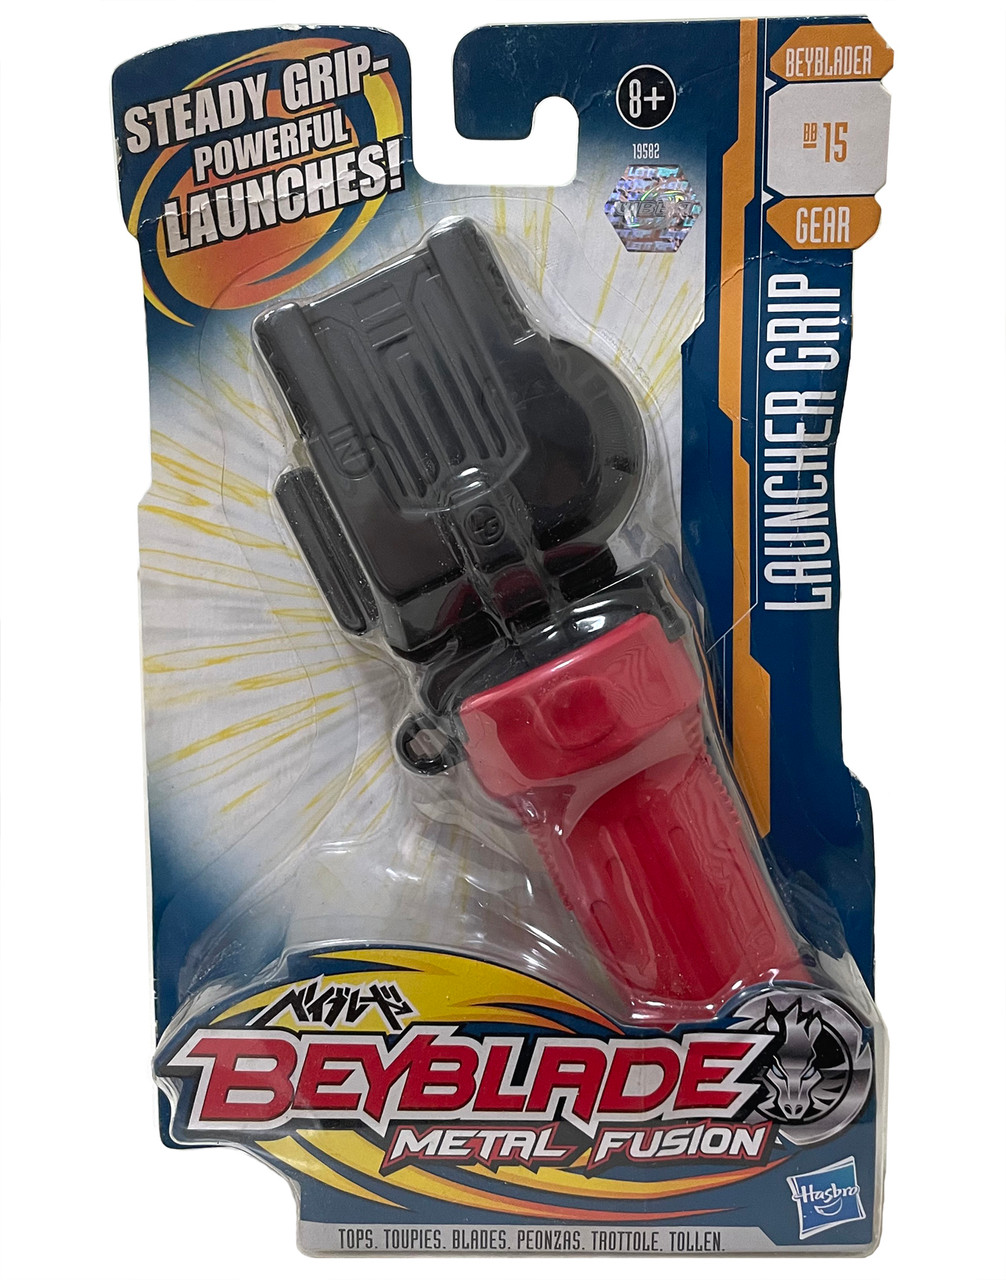 Beyblade Metal Fusion Masters Professional Black Power String Launcher Grip!!! 